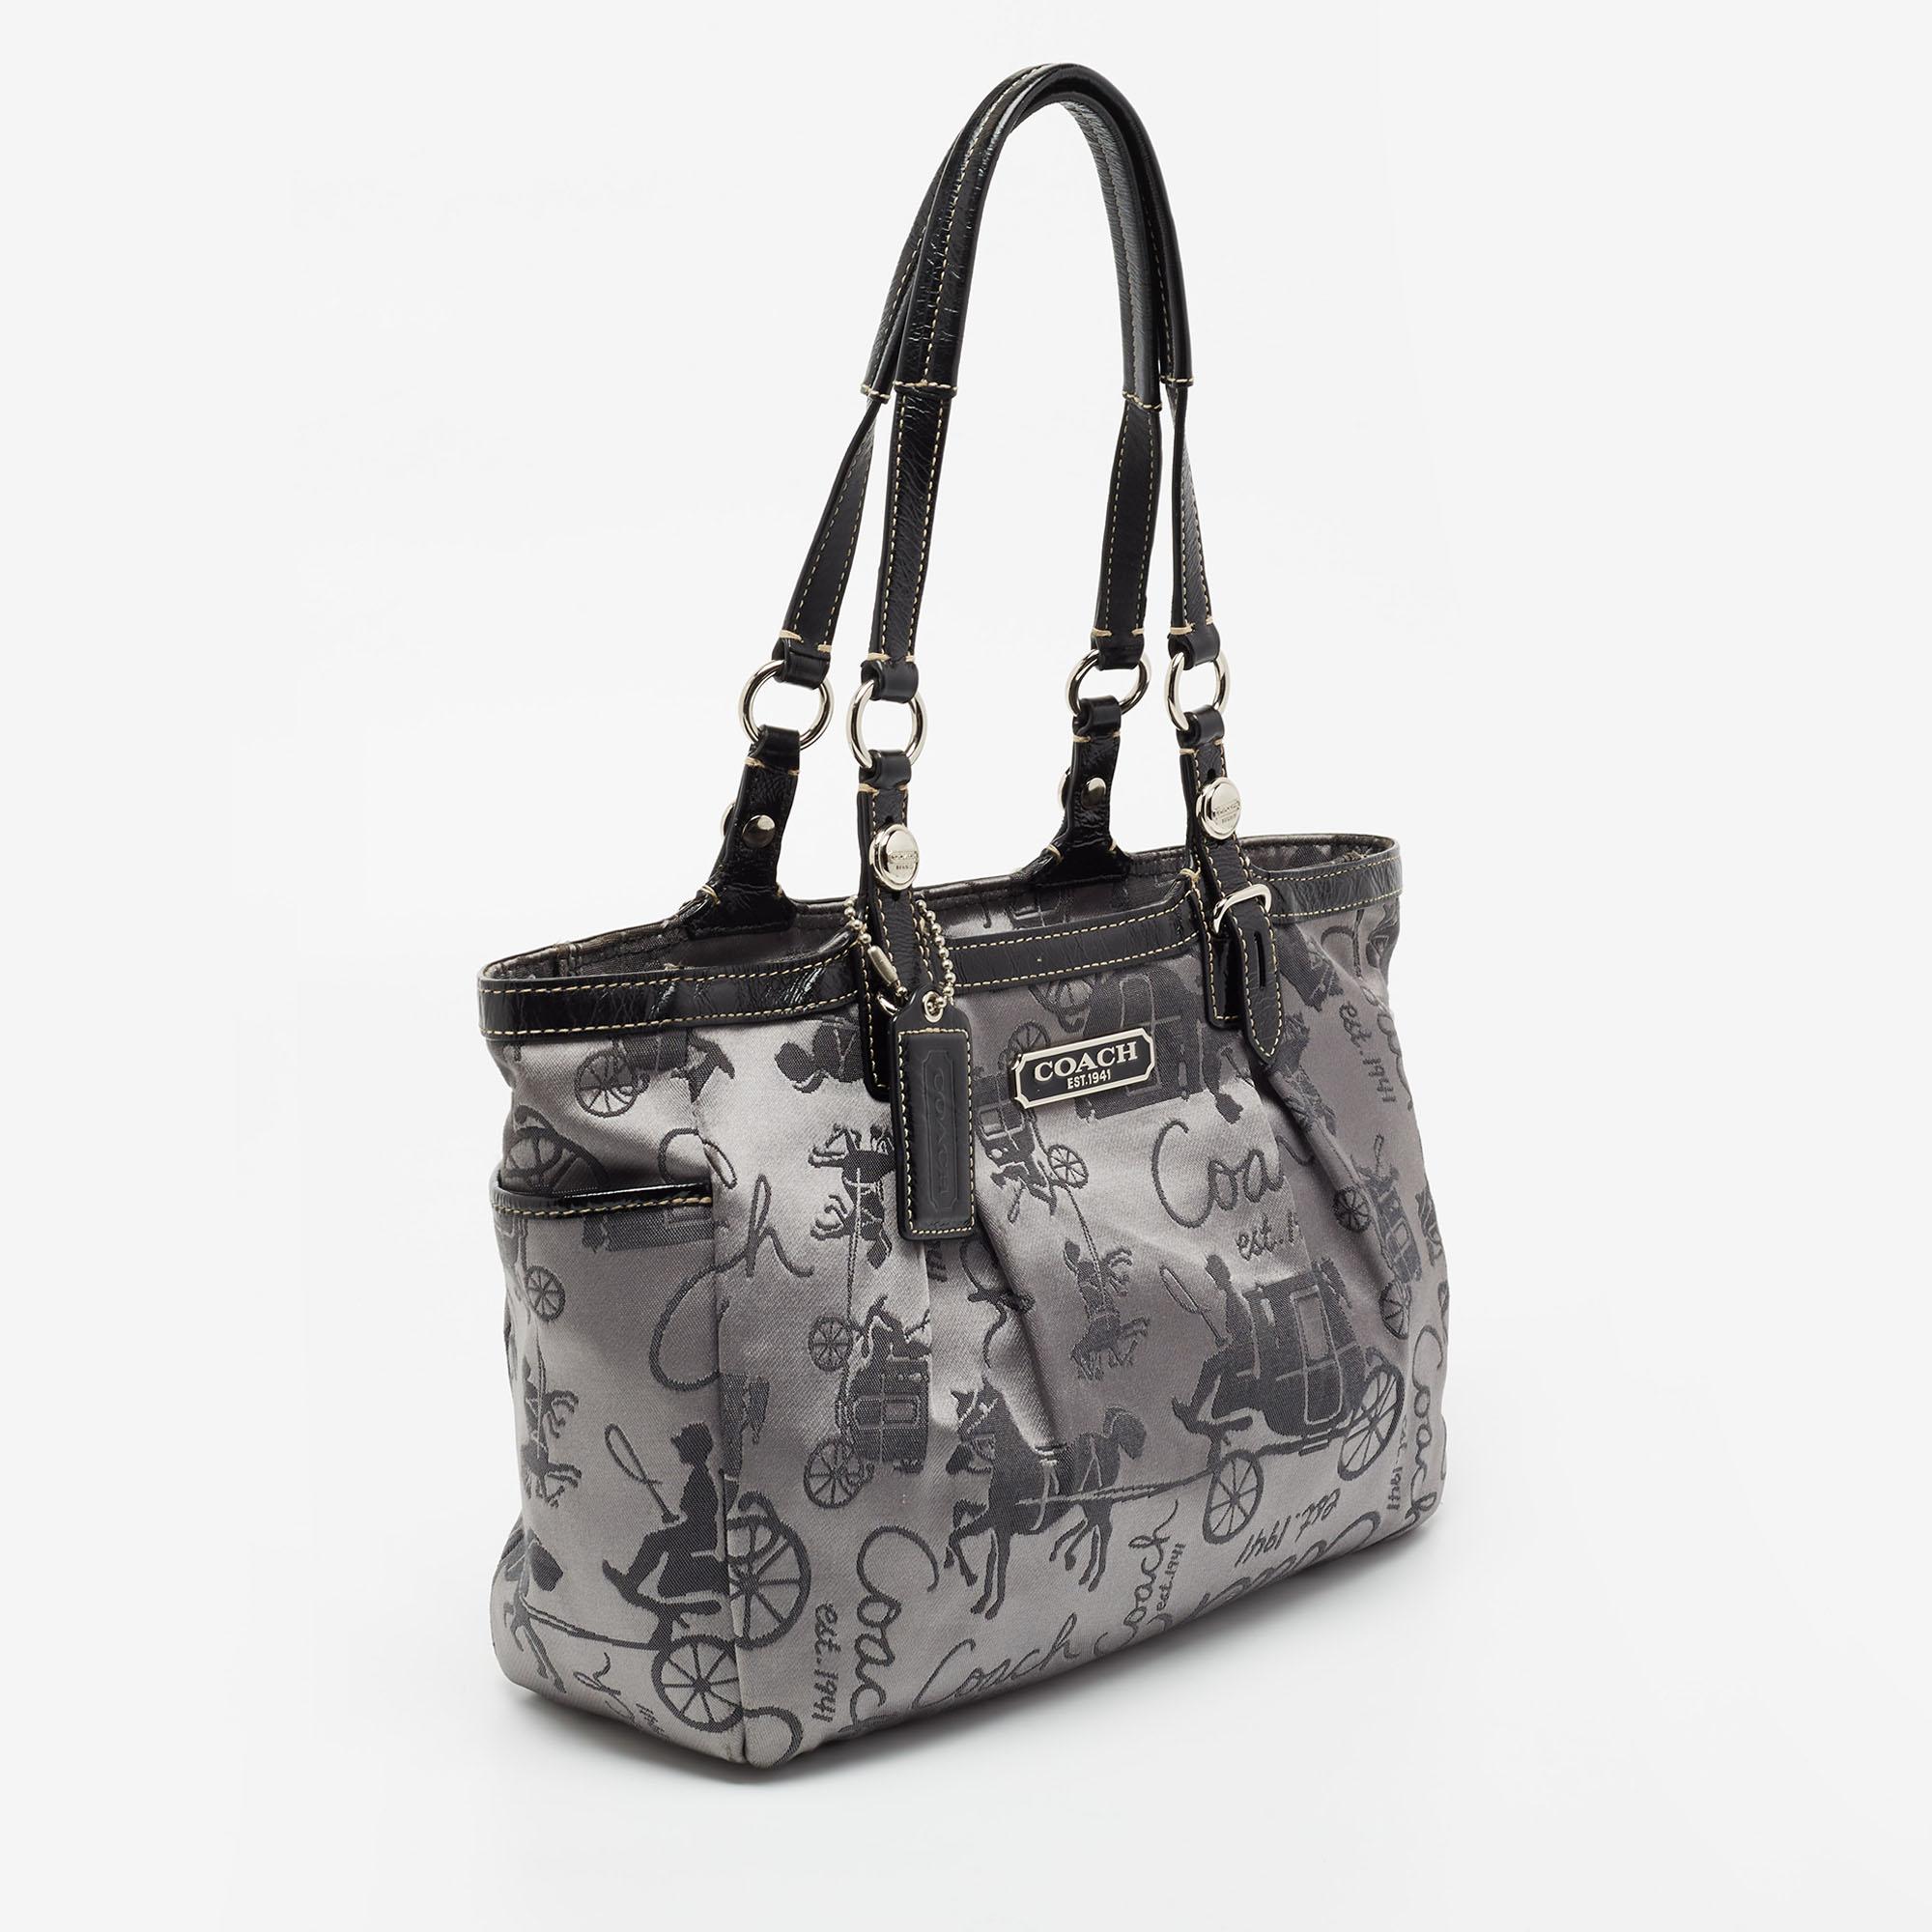 Women's Coach Grey/Black Printed Fabric and Leather Tote